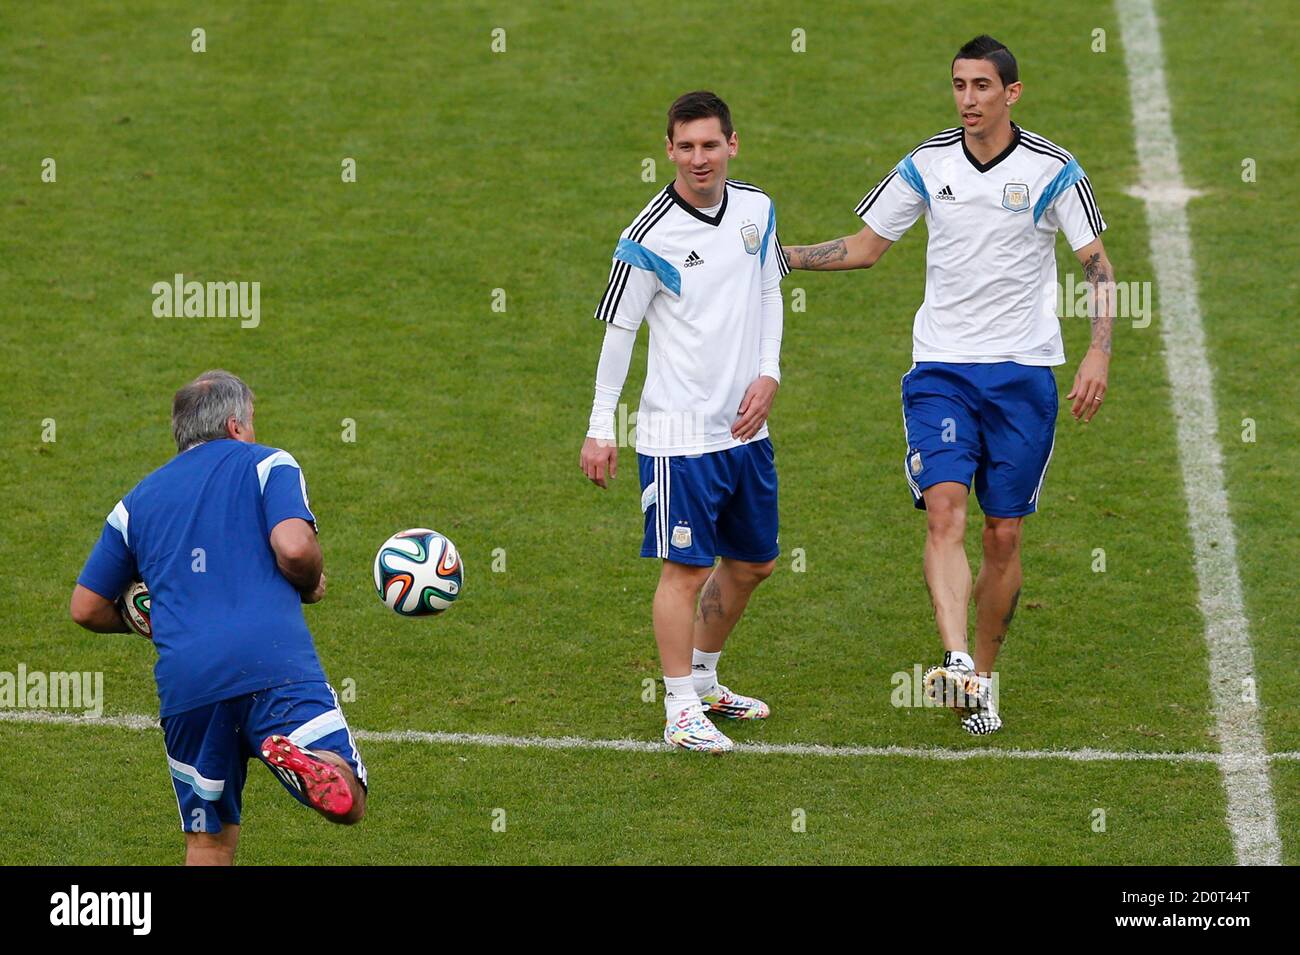 Argentina's national soccer players Lionel Messi (C) and Angel Di Maria attend a training session at the Beira Rio stadium  in Porto Alegre, June 24, 2014. Argentina will play in a Group F match against Nigeria on June 25.  REUTERS/Edgard Garrido (BRAZIL  - Tags:  SOCCER SPORT WORLD CUP) Stock Photo